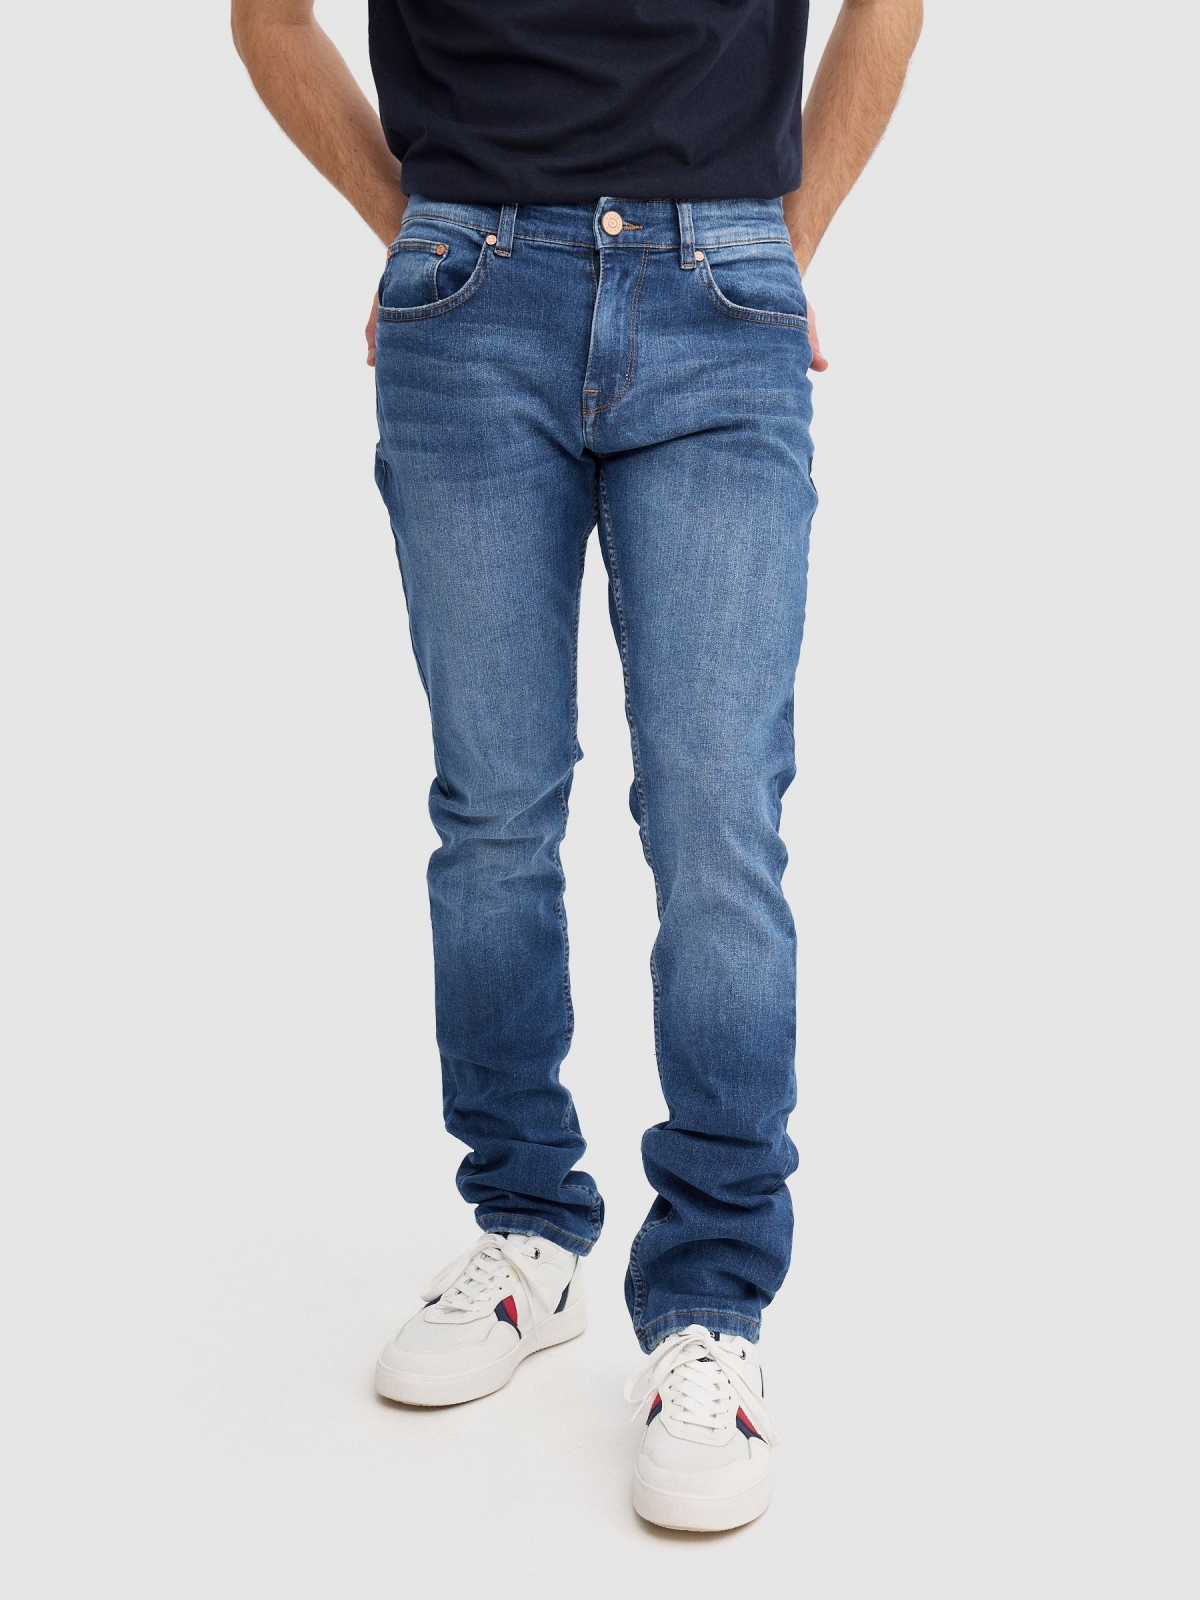 Indigo thigh washed slim jeans blue middle front view